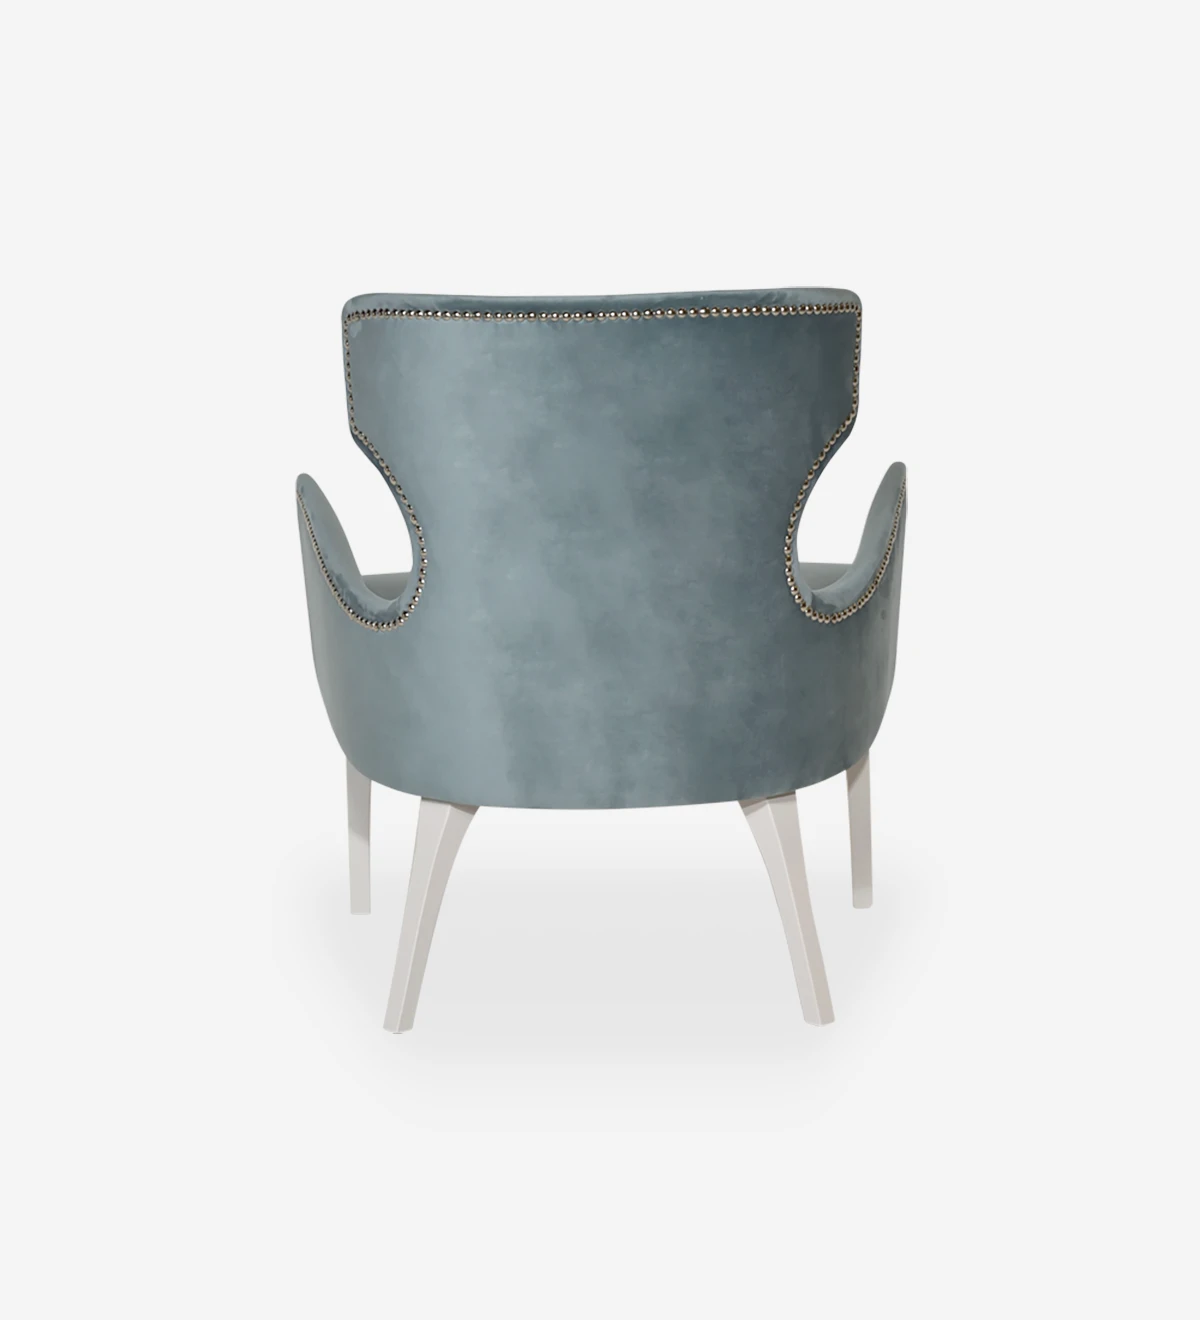 Armchair upholstered in fabric, with silver batting and pearl lacquered feet.